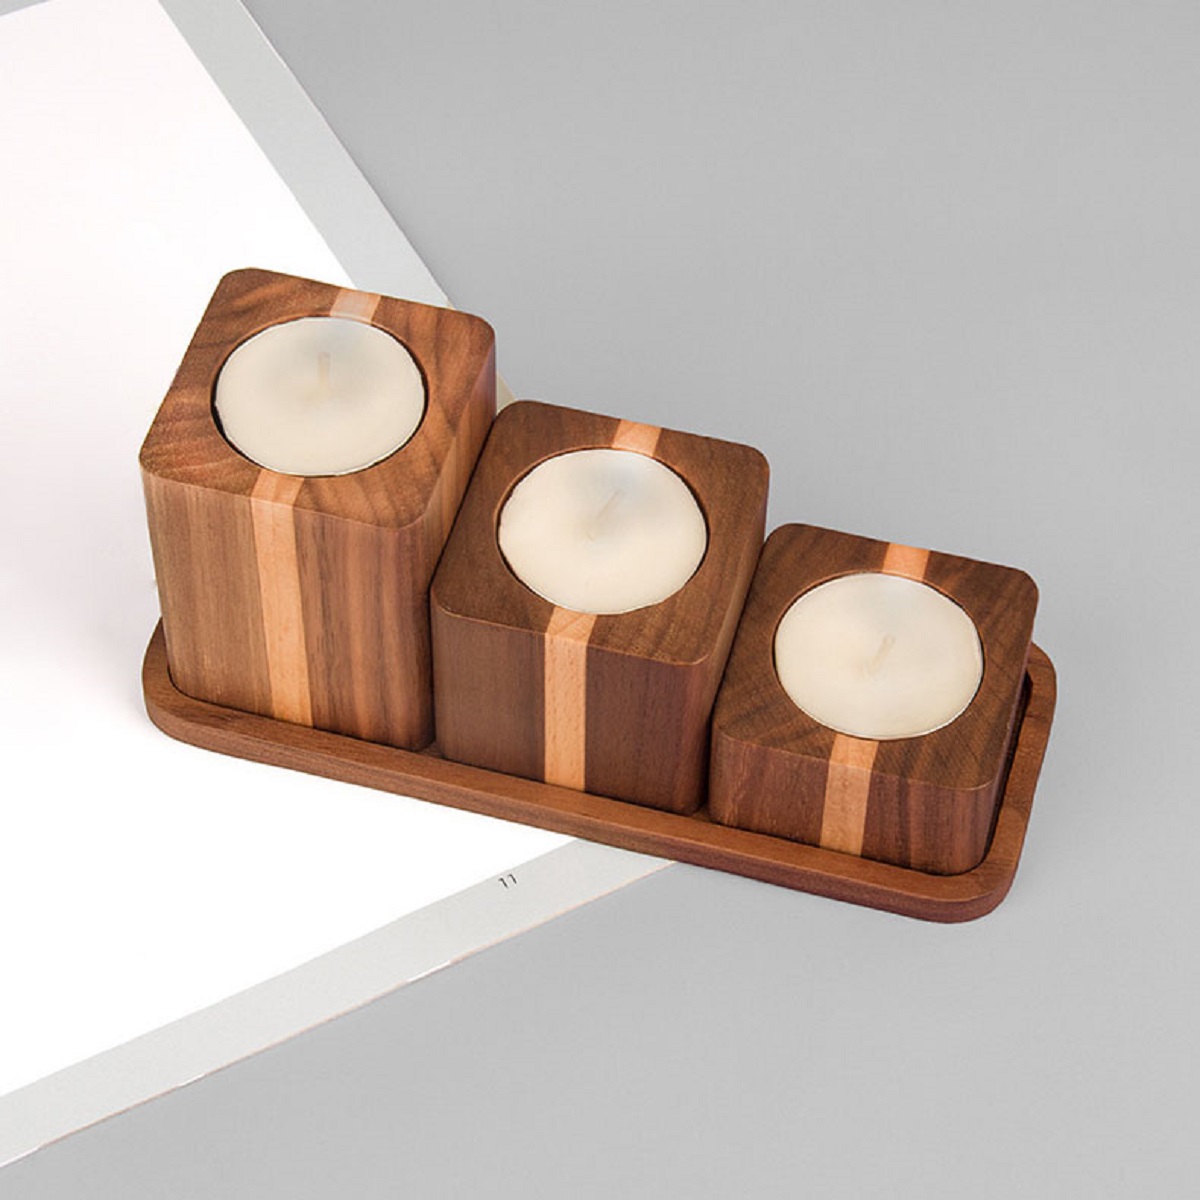 Set of 3 Wooden Candle Holder with tray